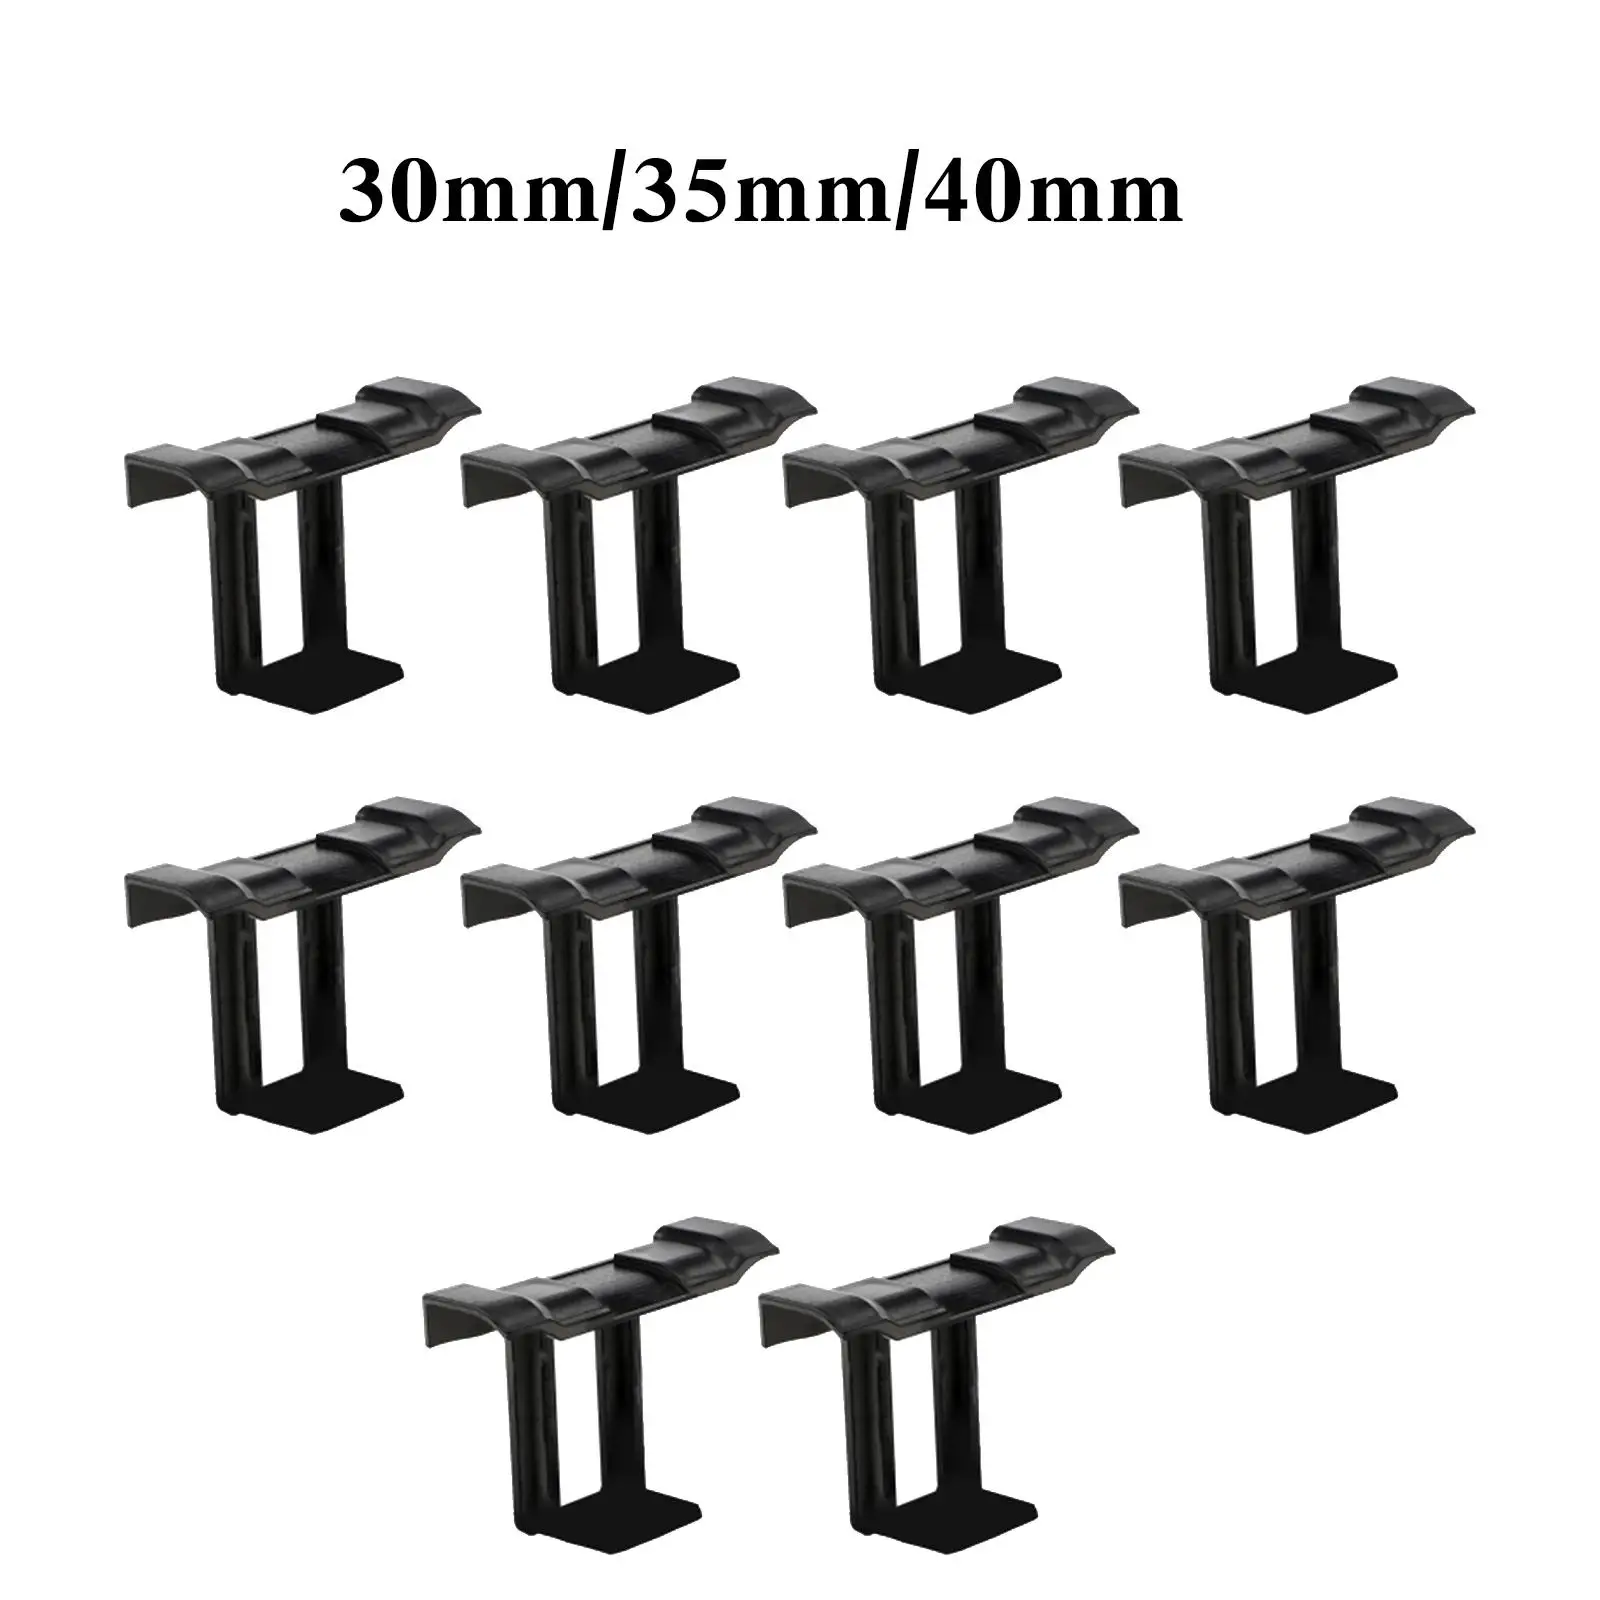 10 Pieces Water Drain Clips Auto Remove Stagnant Water Dust Photovoltaic Clip Pv Modules Cleaning Clips